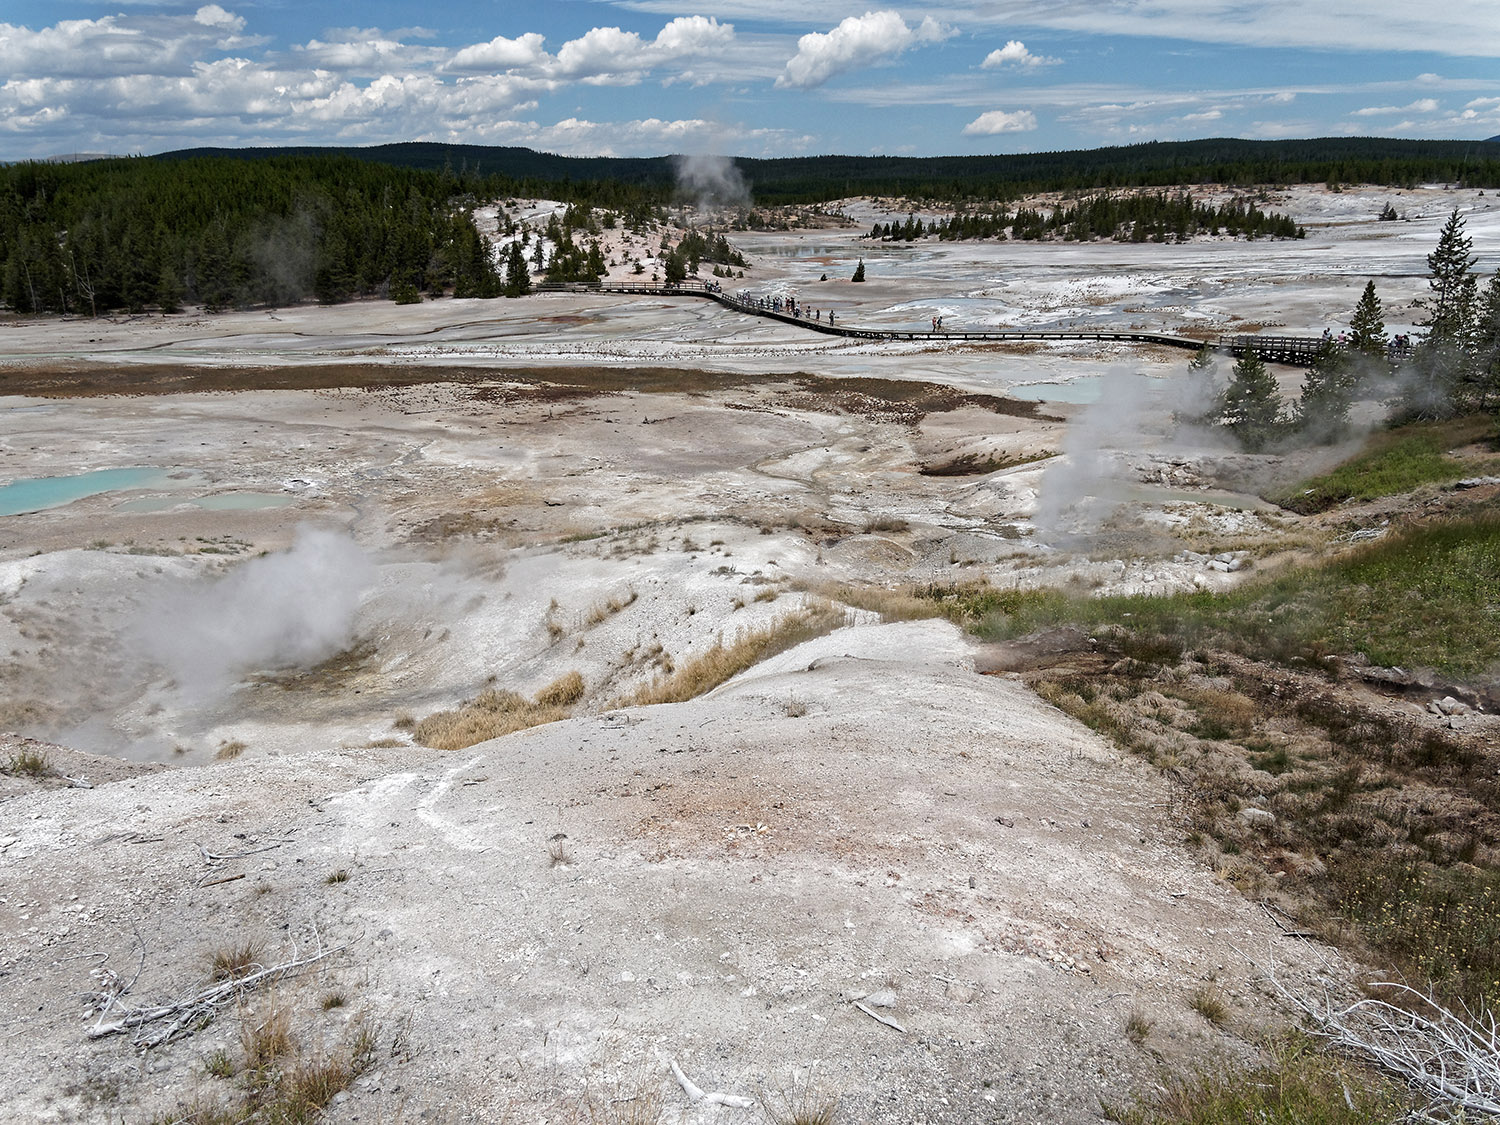 Steam exits fumeroles in the Norris Geyser Basin.  Yellowstone's magma chamber is 5 to 7 miles below the surface and heats the rocks that heat the water for the region's hot springs and geysers.